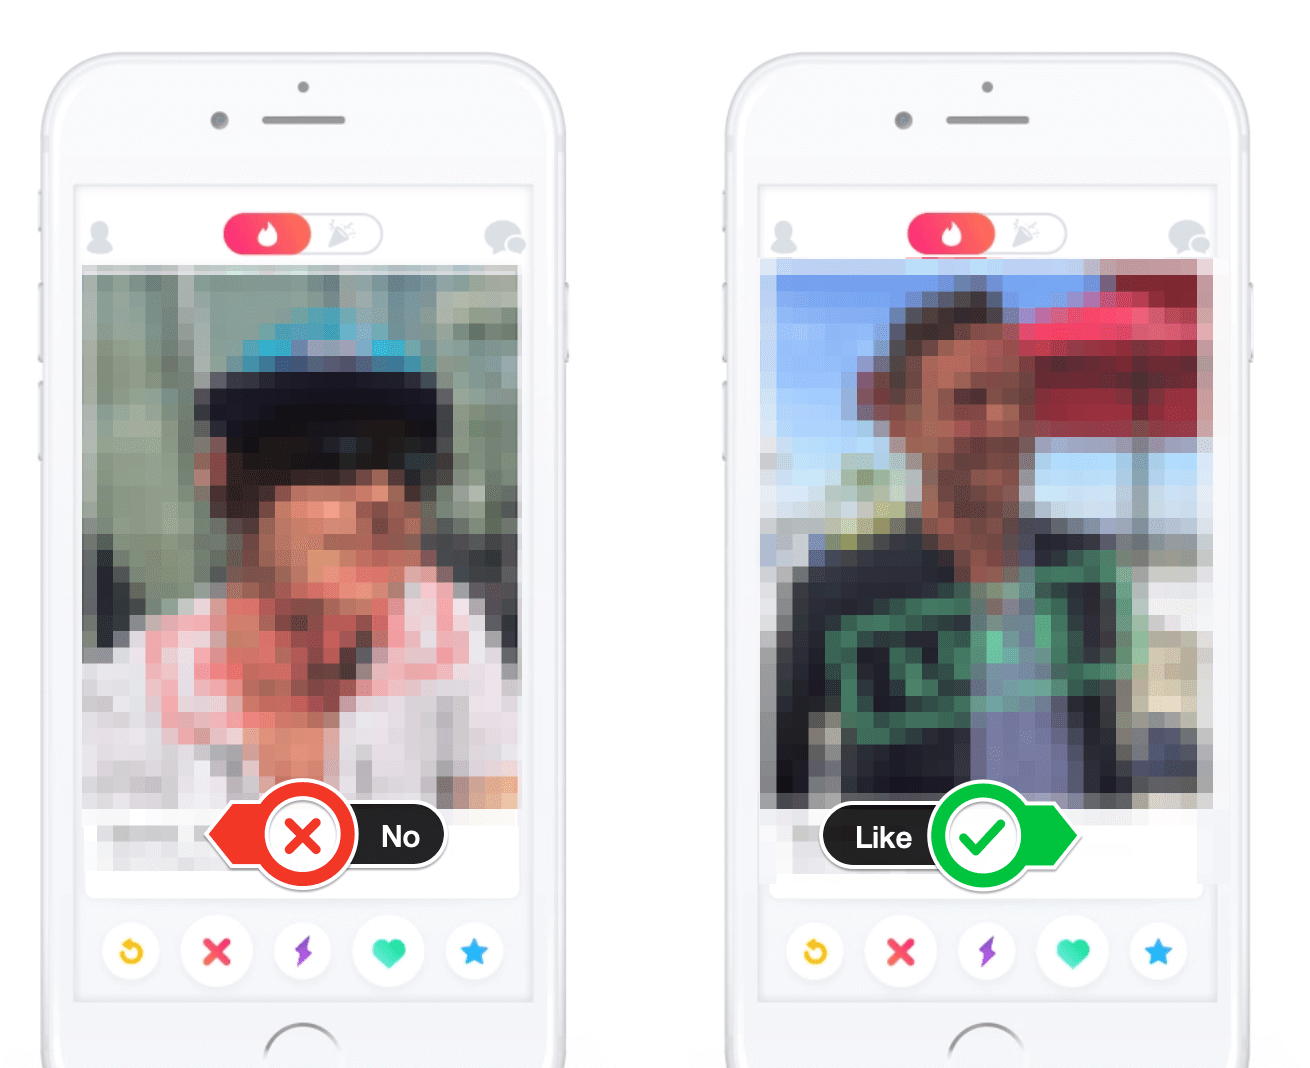 Search Tinder with swiping